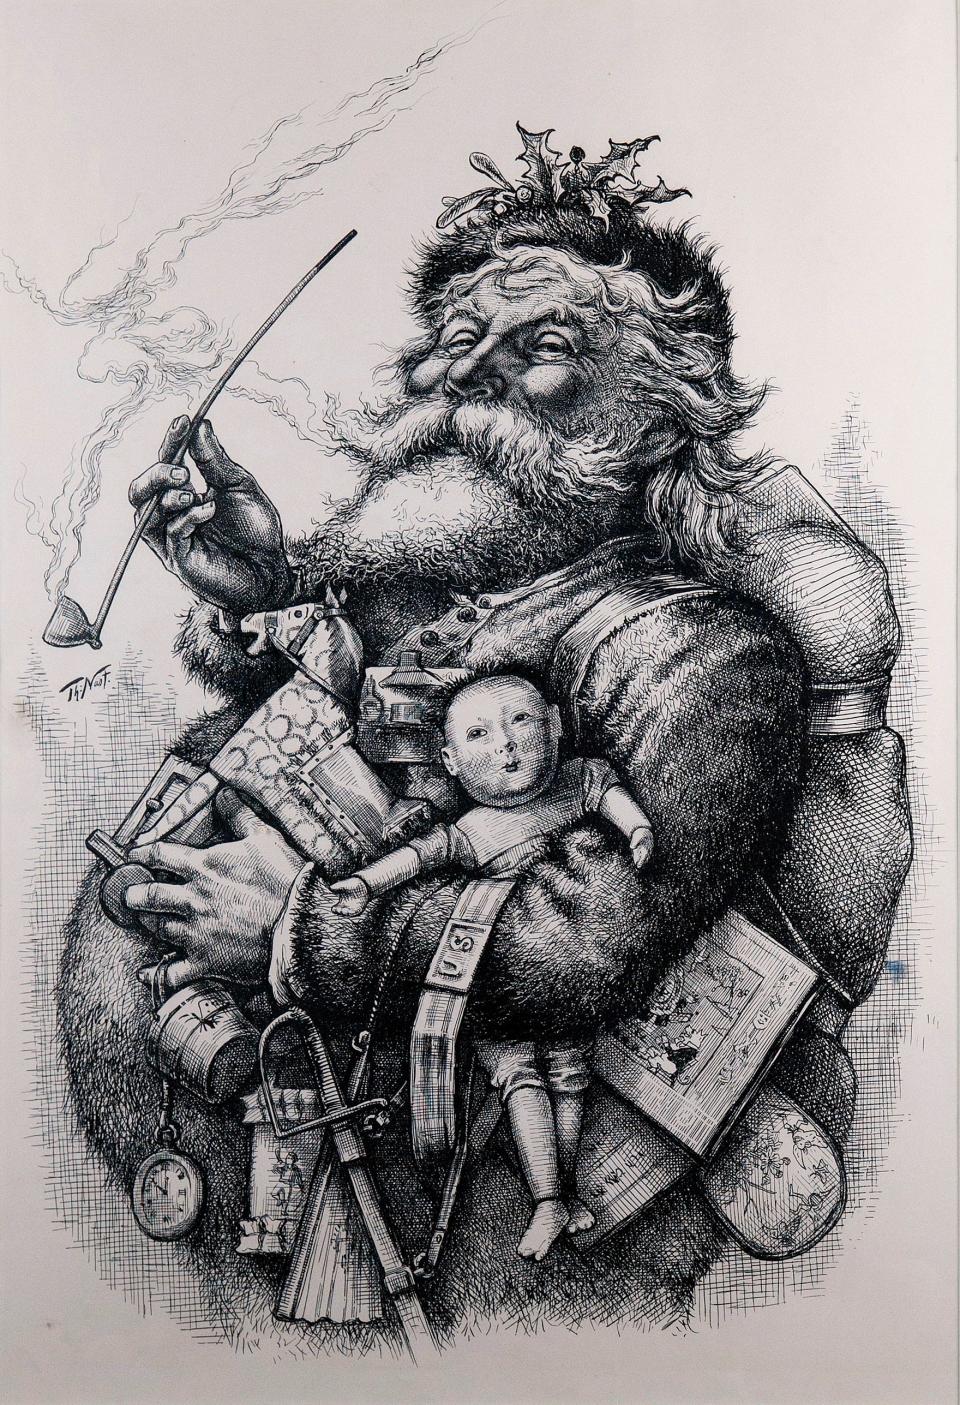 Illustrator Thomas Nast cemented the vision of Santa Clause best known today.